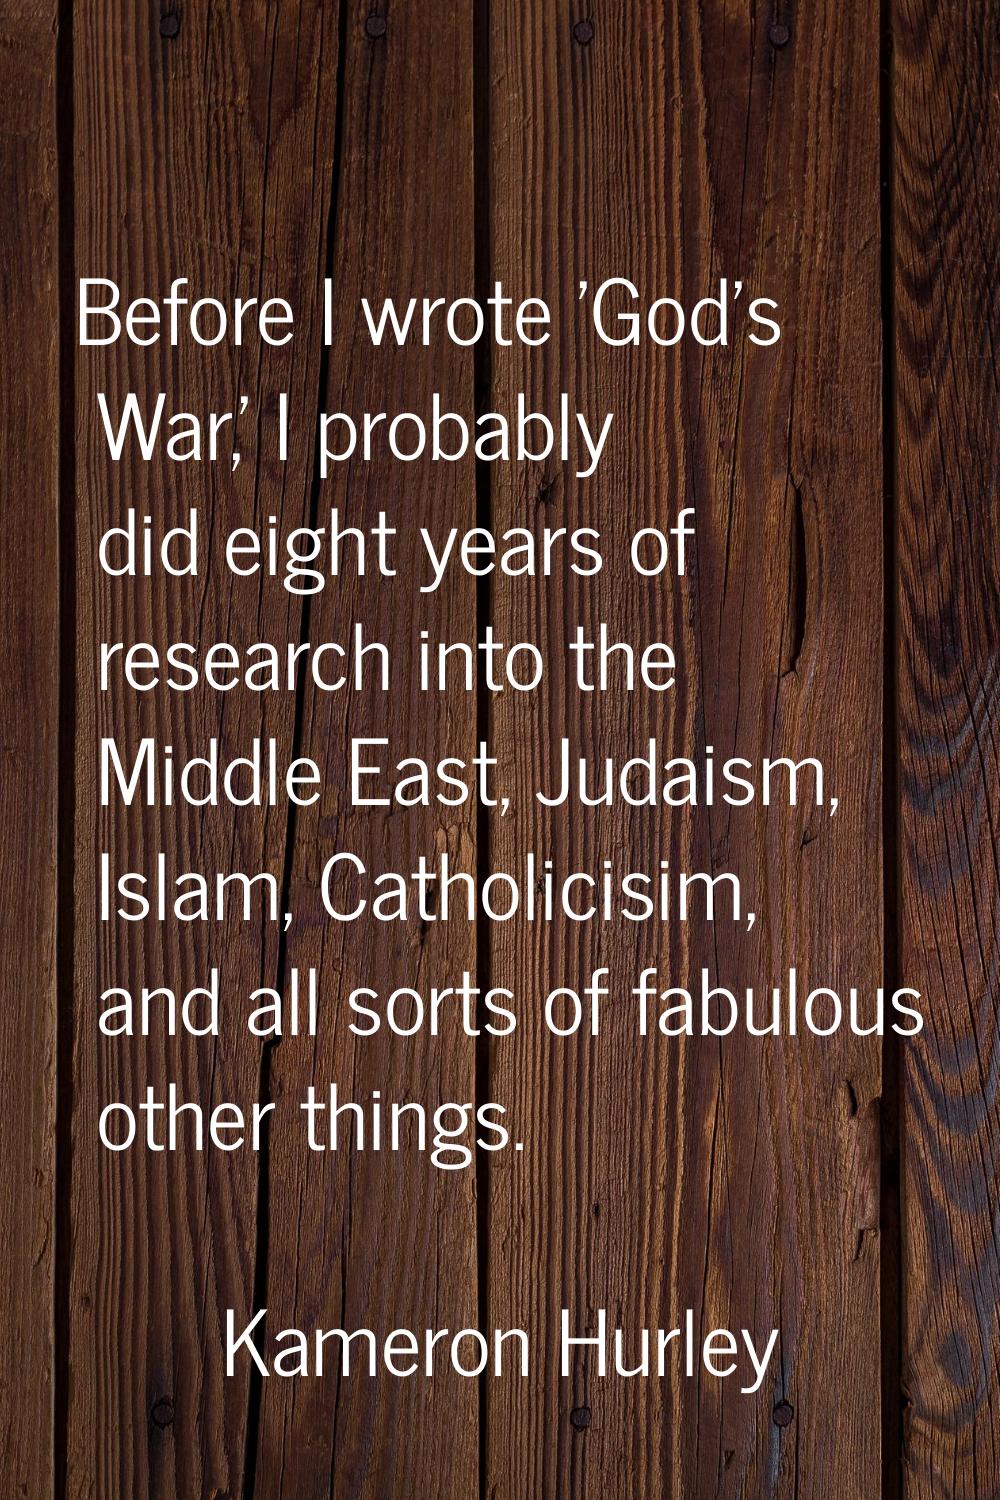 Before I wrote 'God's War,' I probably did eight years of research into the Middle East, Judaism, I